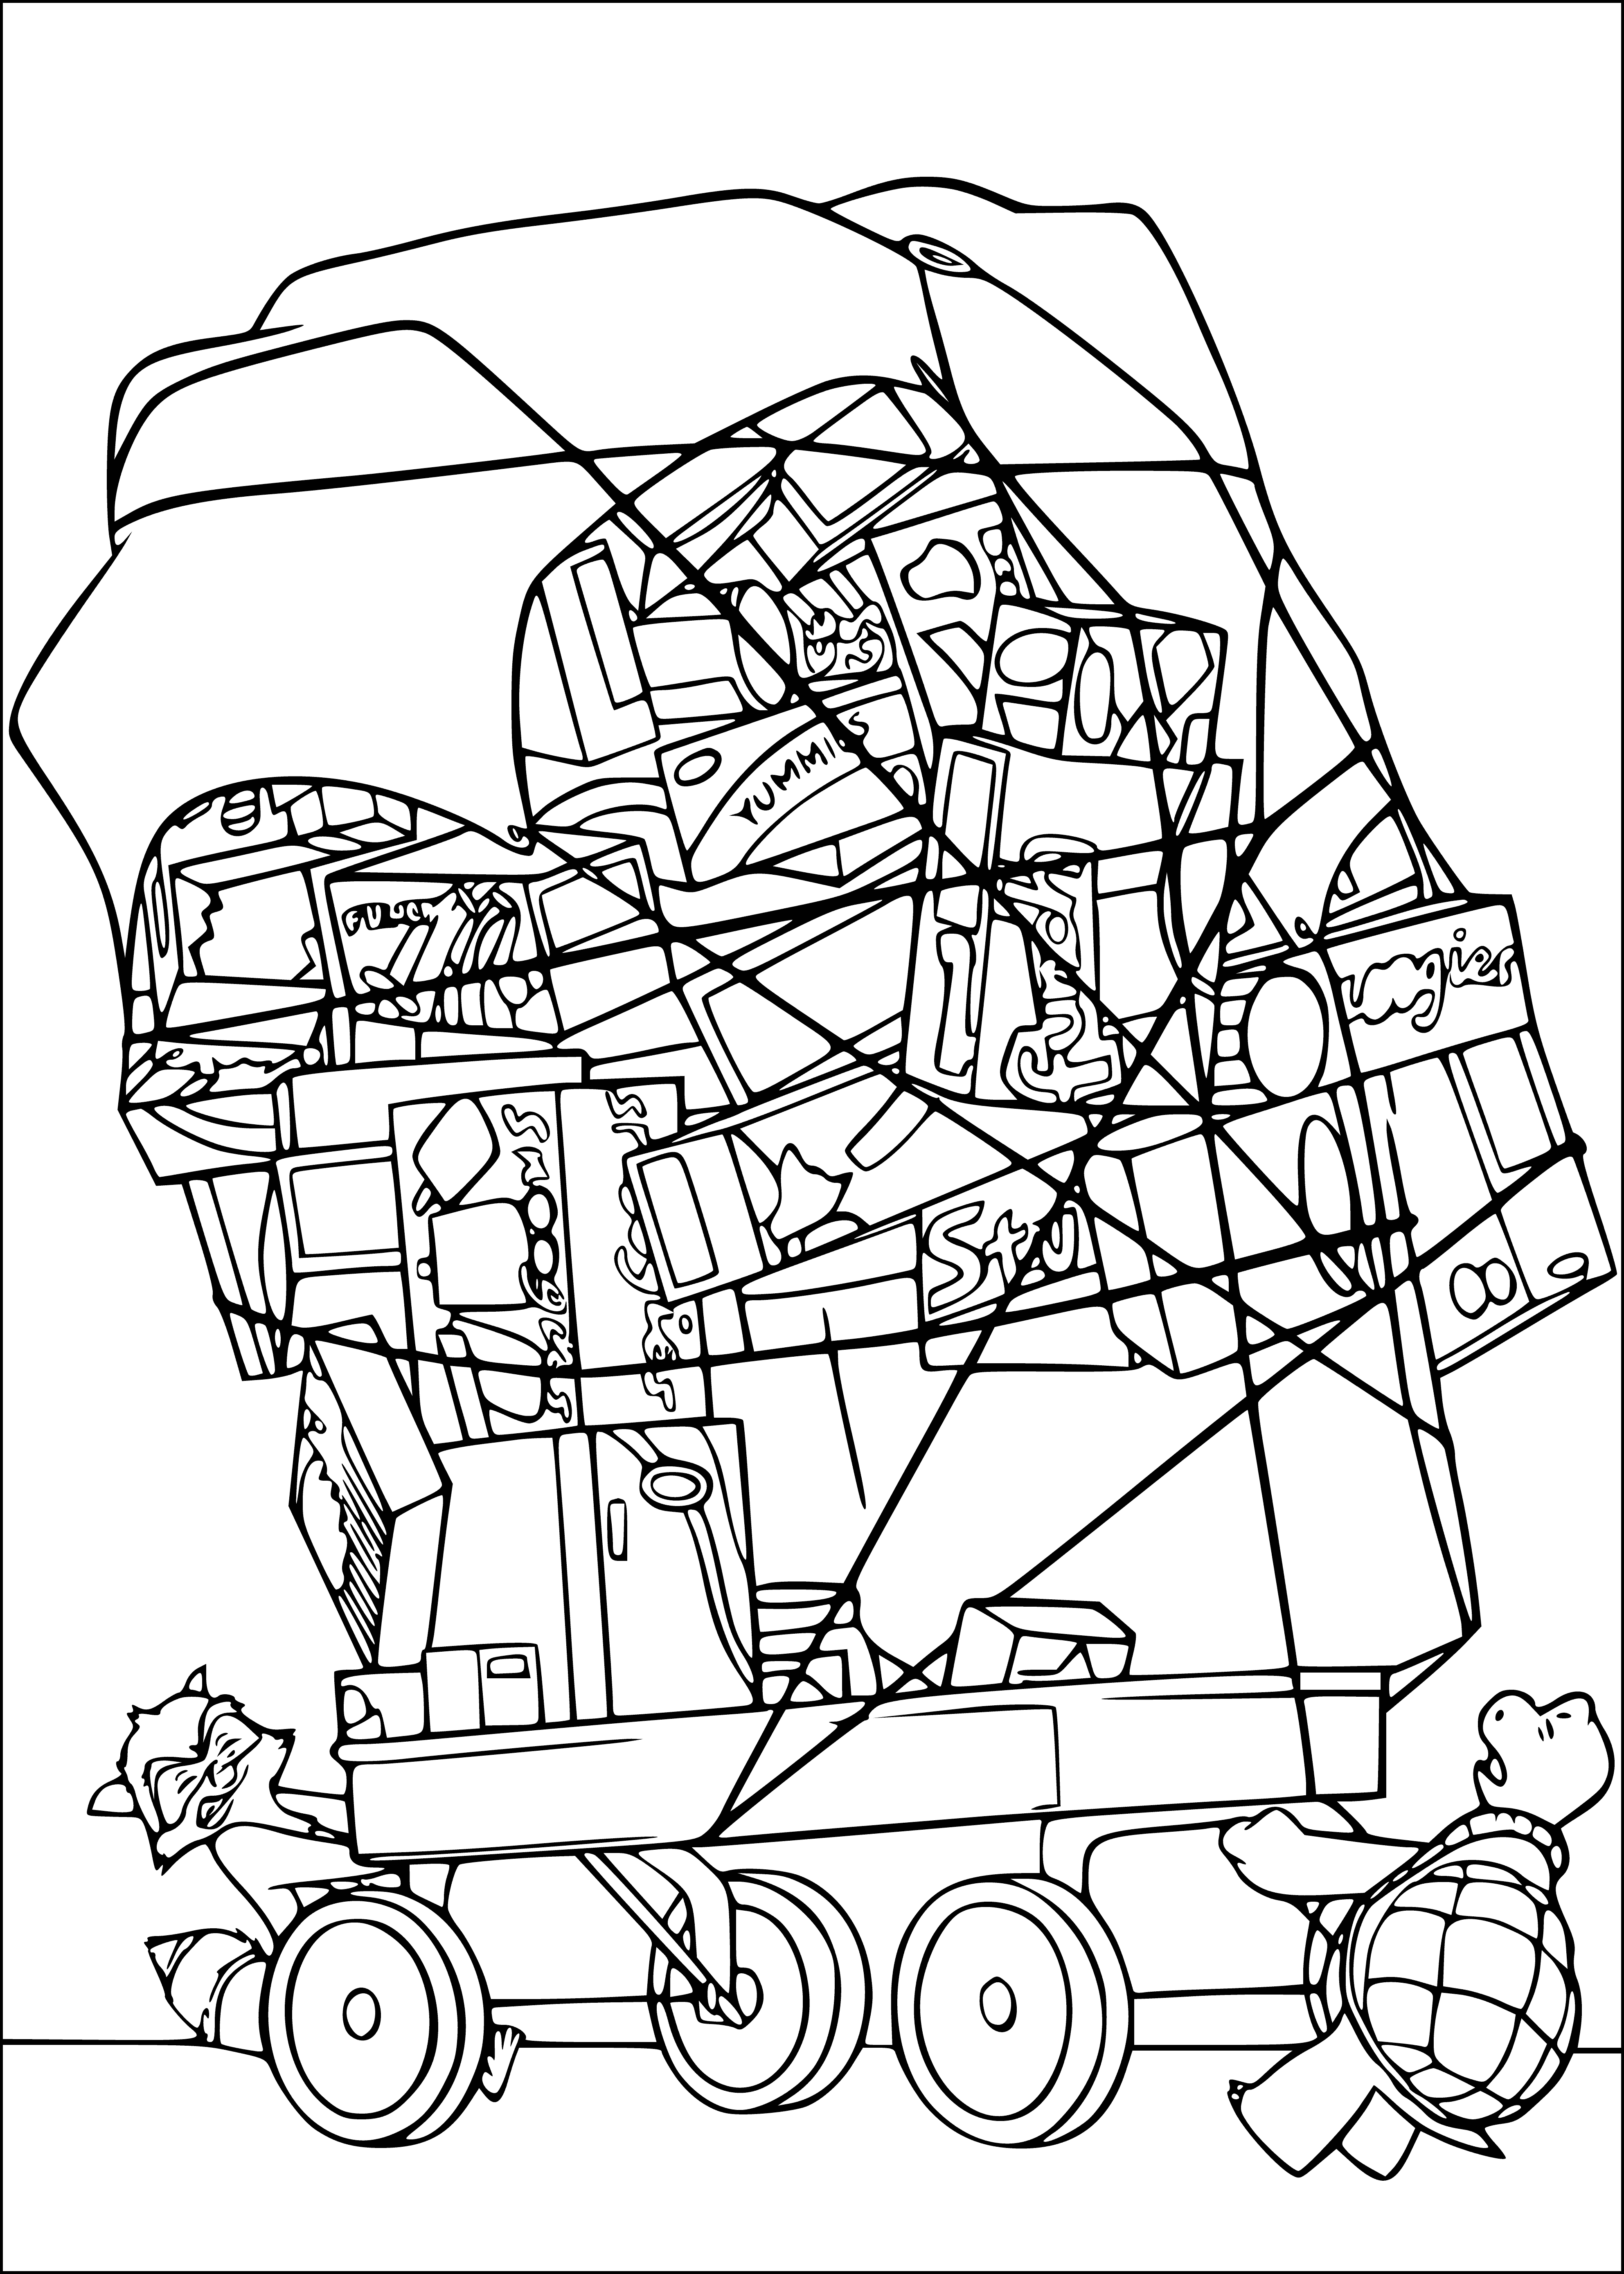 Cart coloring page